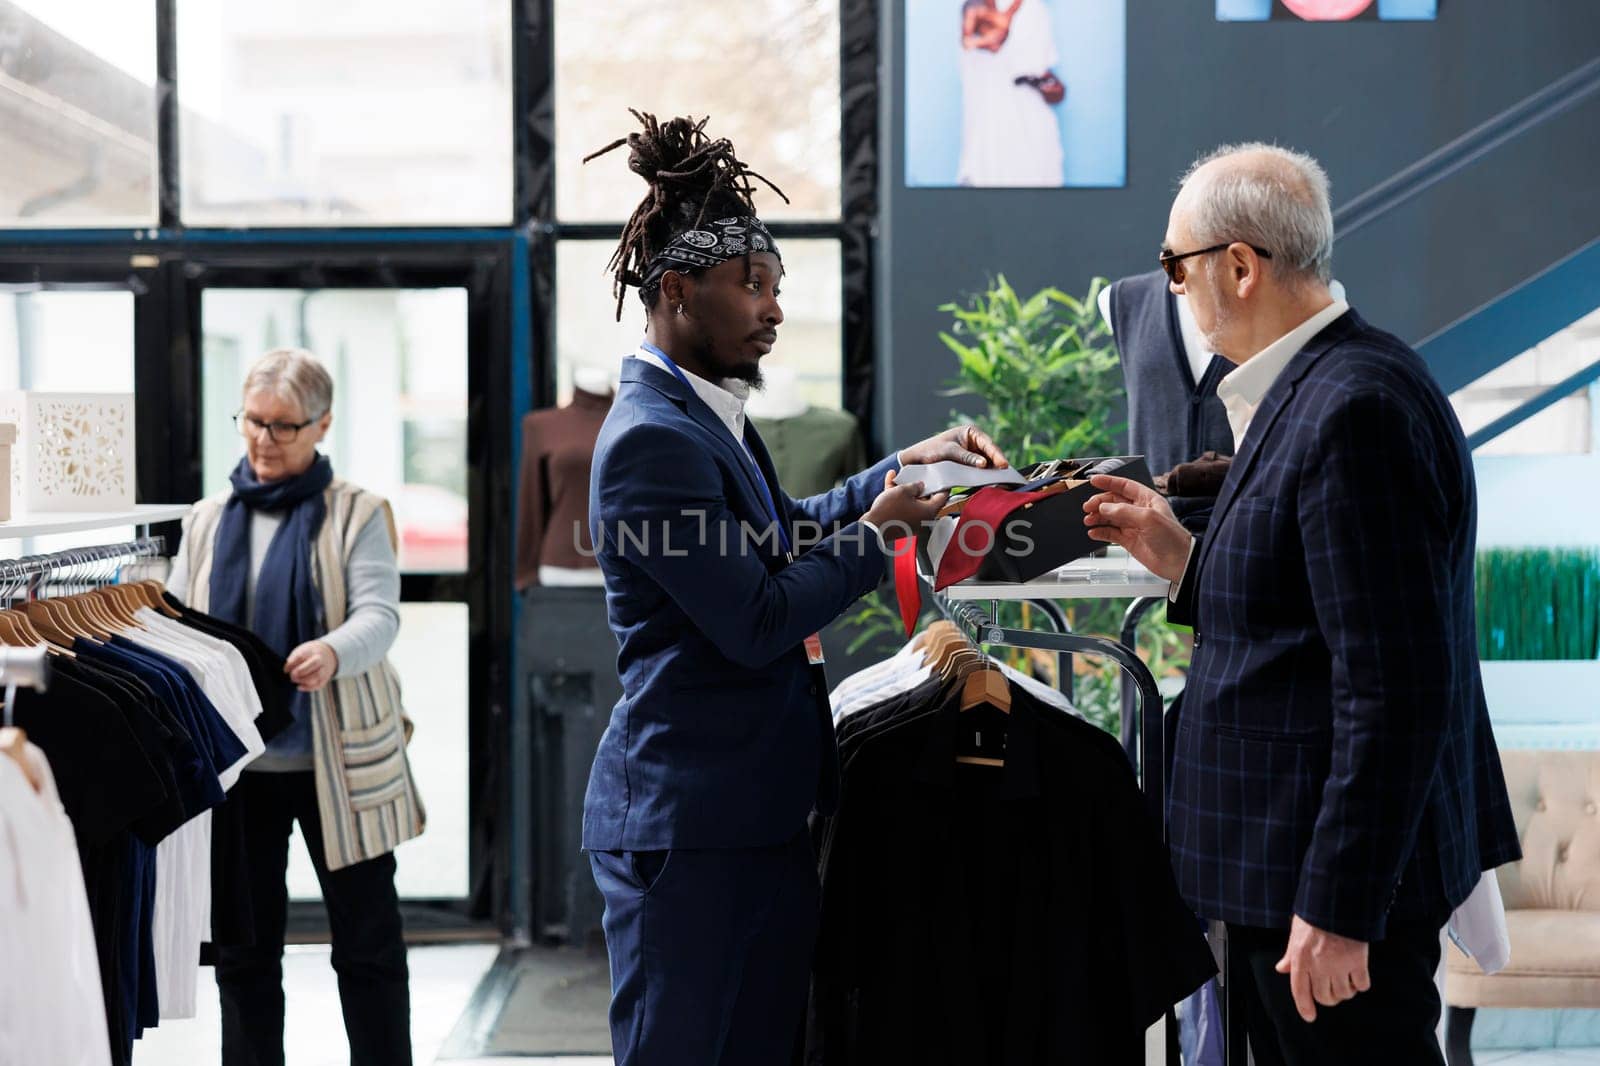 African american employee helping customer with right tie, analyzing fabric in modern boutique. Elderly client wearing stylish suit shopping for casual wear and fashionable merchandise in showroom